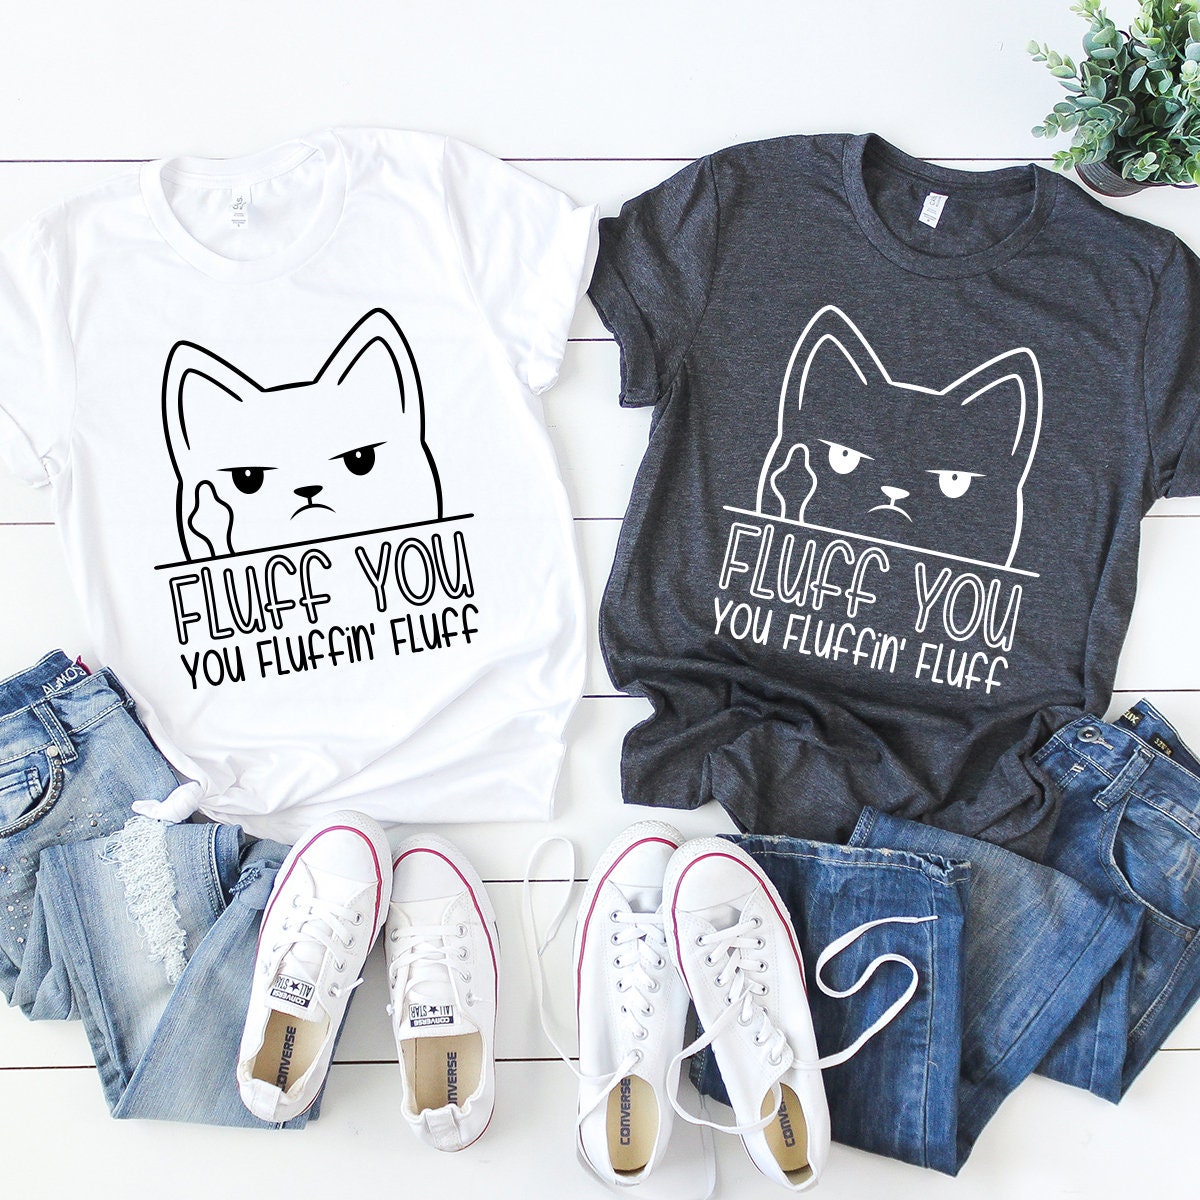 Funny Cat Shirt, Funny Saying TShirt, Funny Sarcastic T-Shirt, Fluff You Fluffin Fluff Shirt, Cool Women Gift, Humorous T Shirt, Kitty Tee - Fastdeliverytees.com